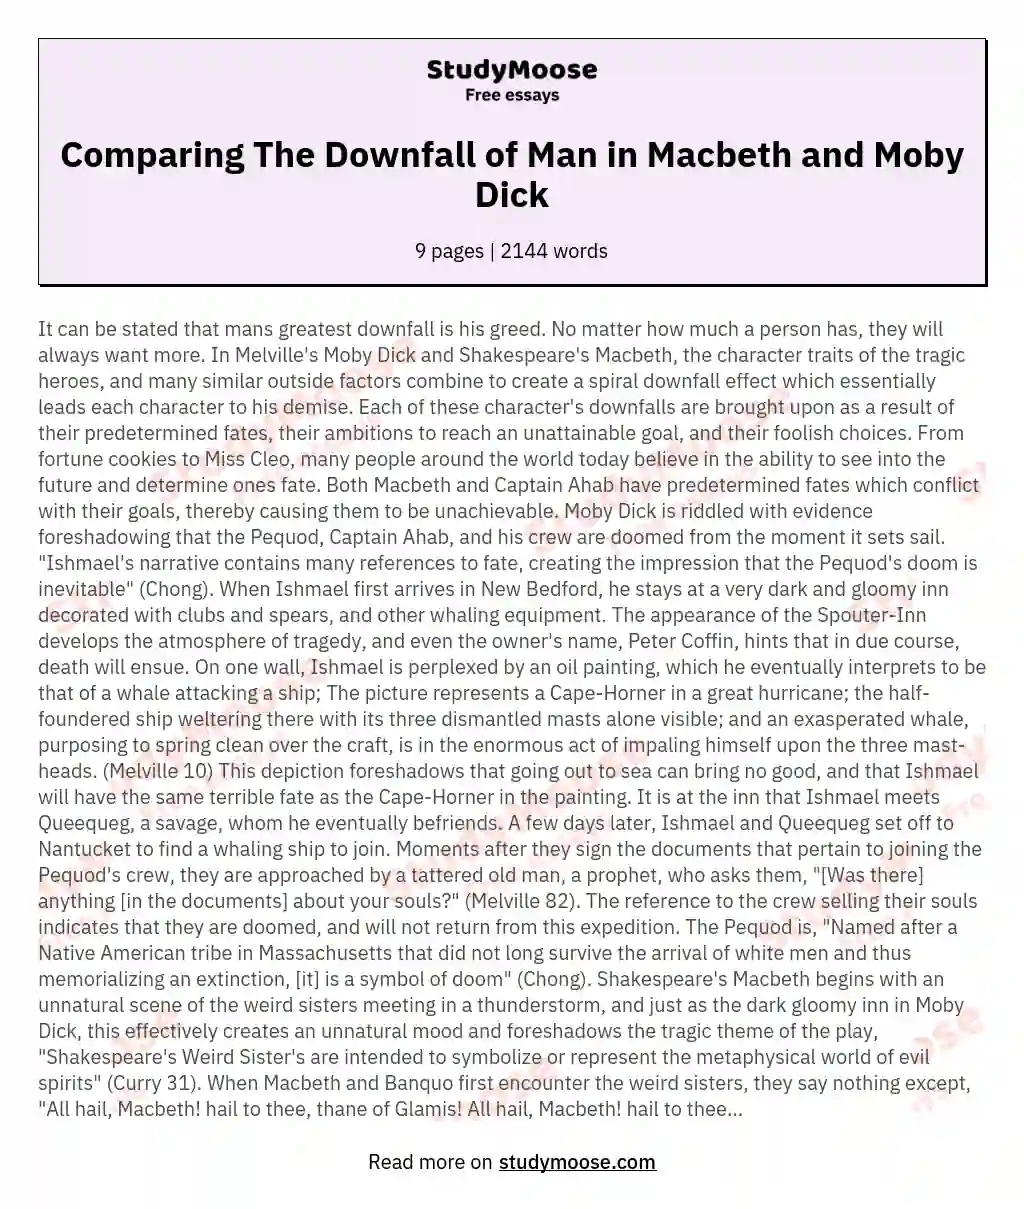 Comparing The Downfall of Man in Macbeth and Moby Dick essay